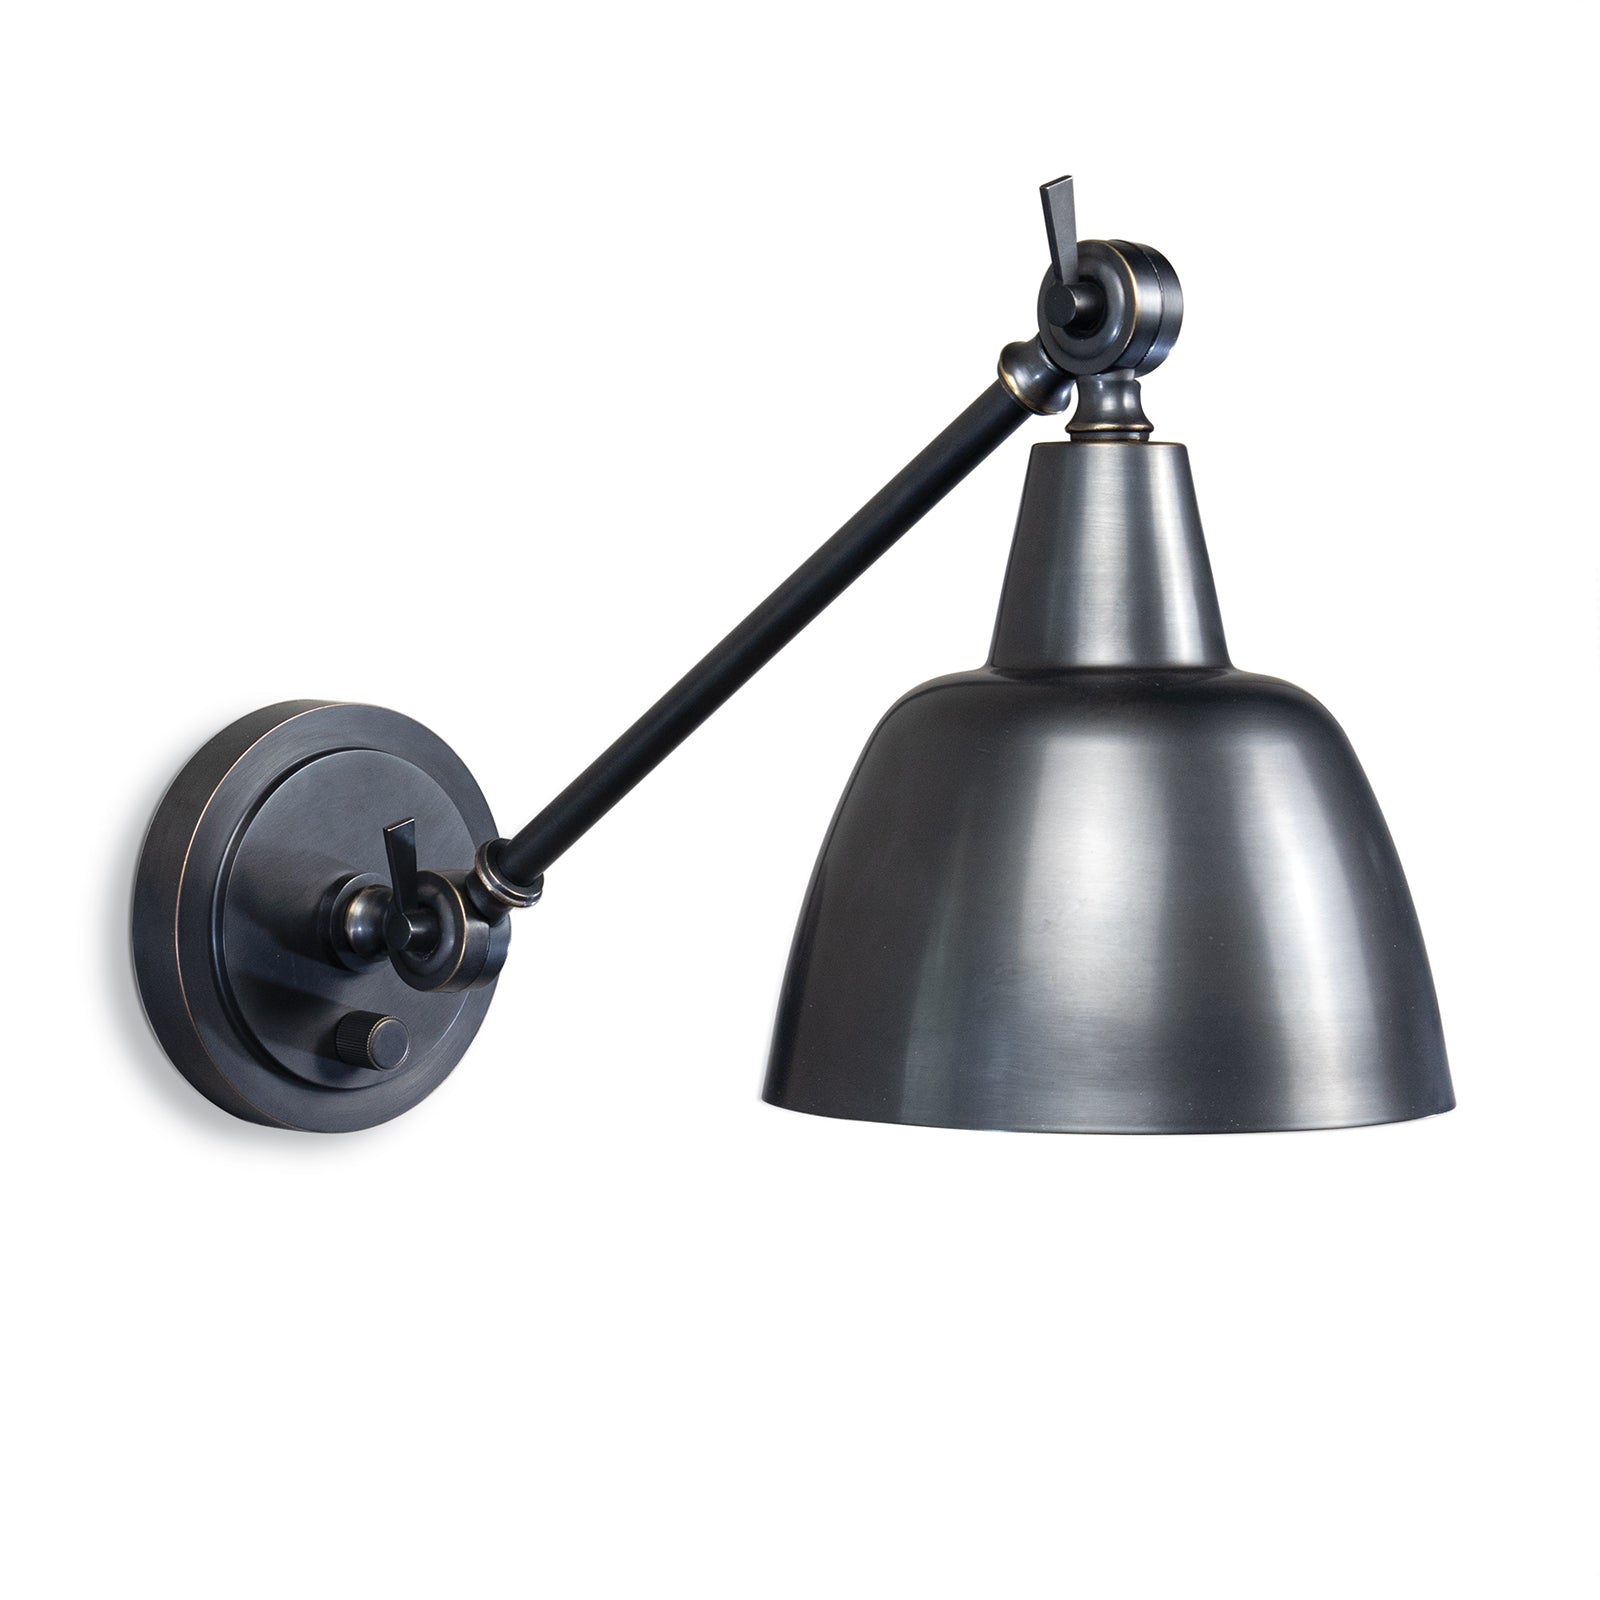 Mercantile Sconce in Oil Rubbed Bronze by Southern Living